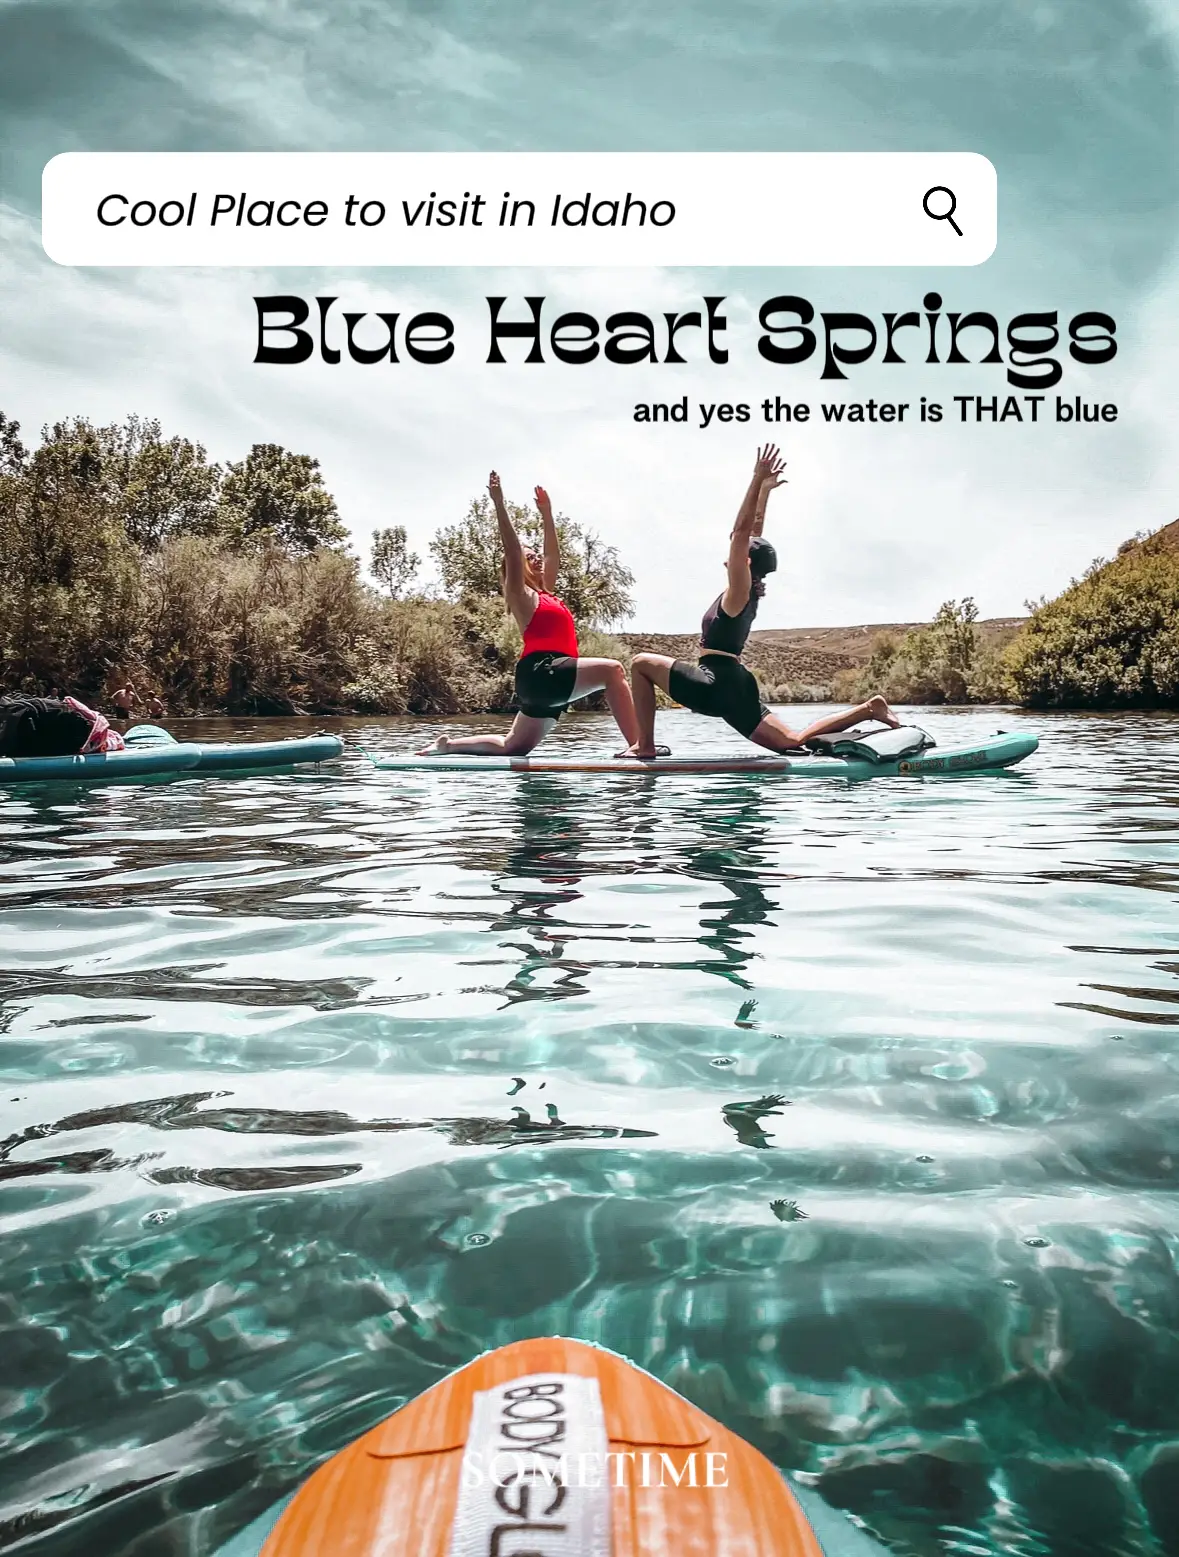 Blue Heart Springs in Idaho's images